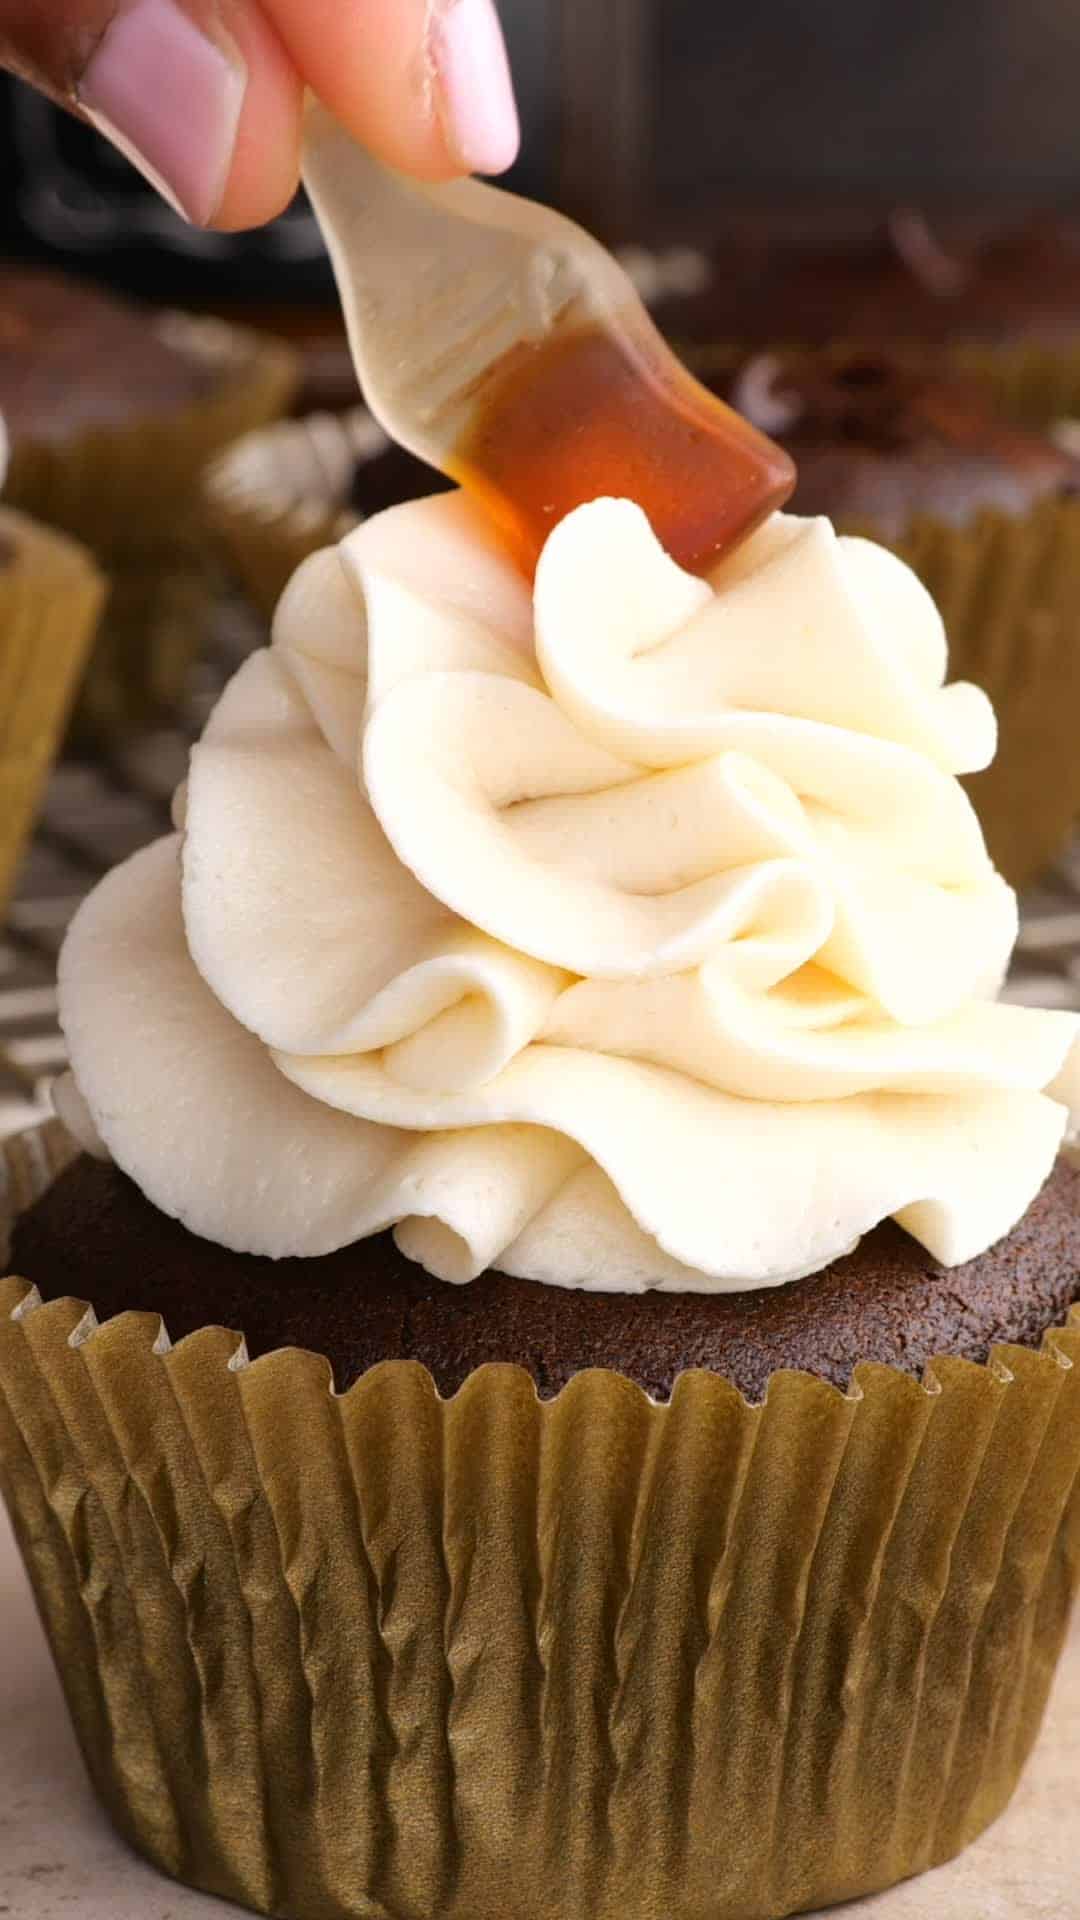 A gummy cola bottle candy being placed on top of the frosting on a chocolate cupcake